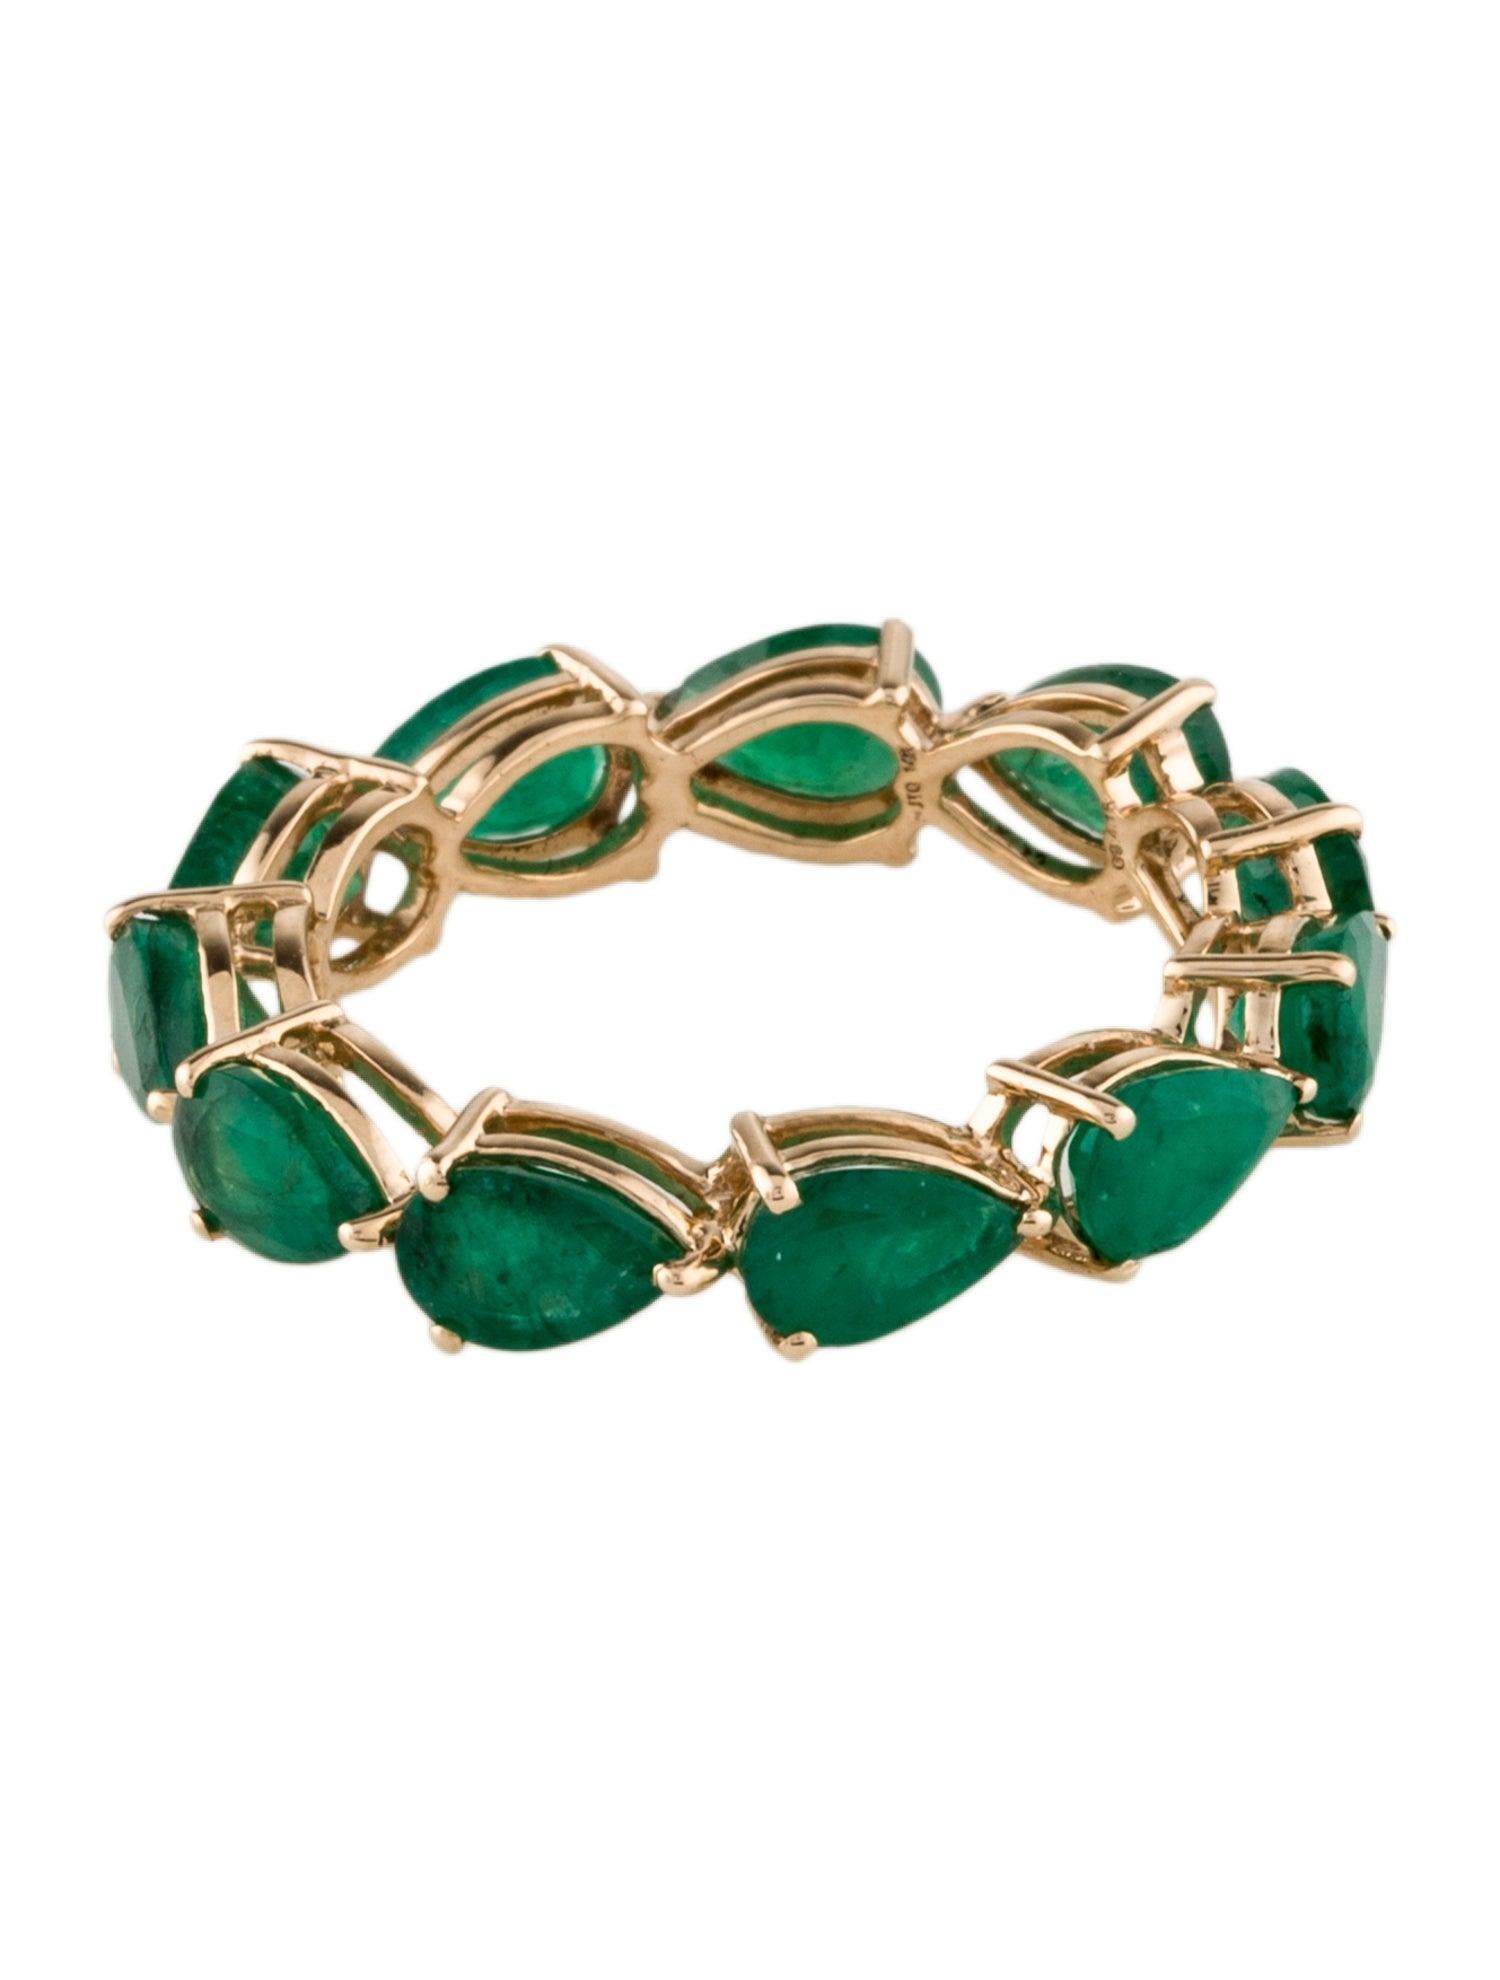 Introducing our stunning 14K Yellow Gold Emerald Eternity Band, a symbol of everlasting elegance and luxury. Crafted to perfection, this Size 8 band features a continuous circle of 11 Pear Modified Brilliant Emeralds, totaling 4.16 carats. Each